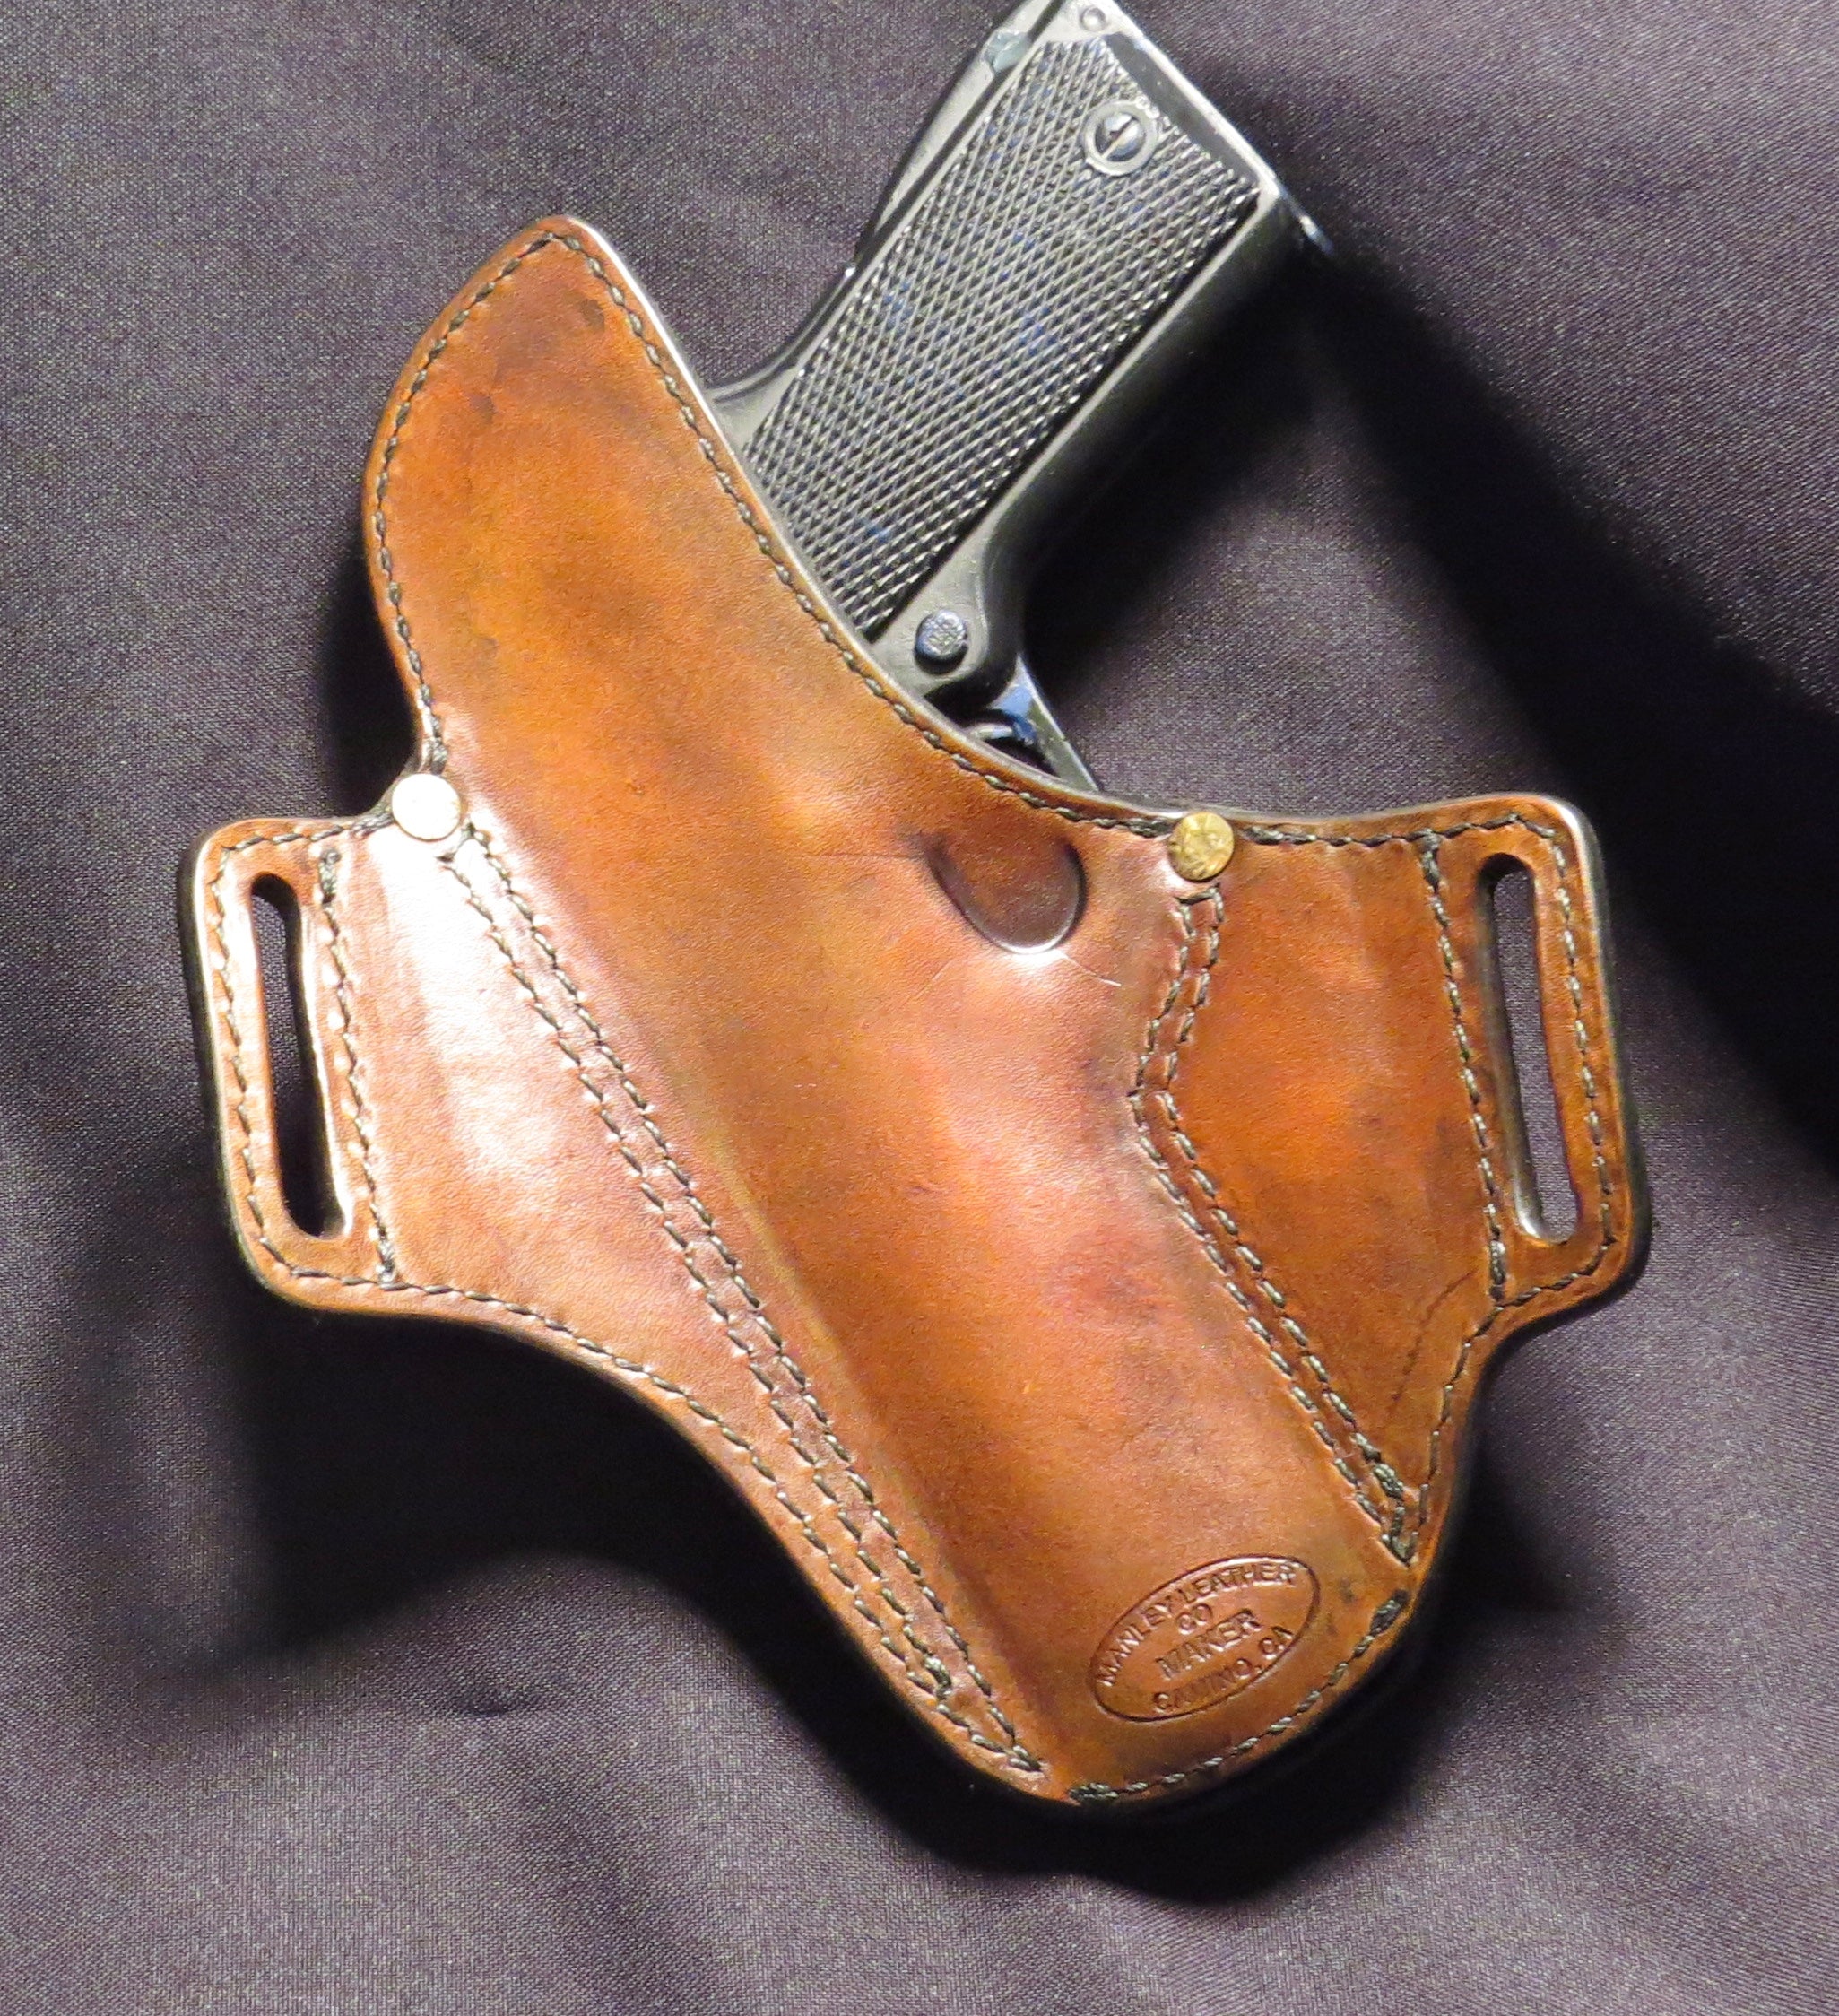 1911 5" Hand Tooled Basket Weave Leather Holster